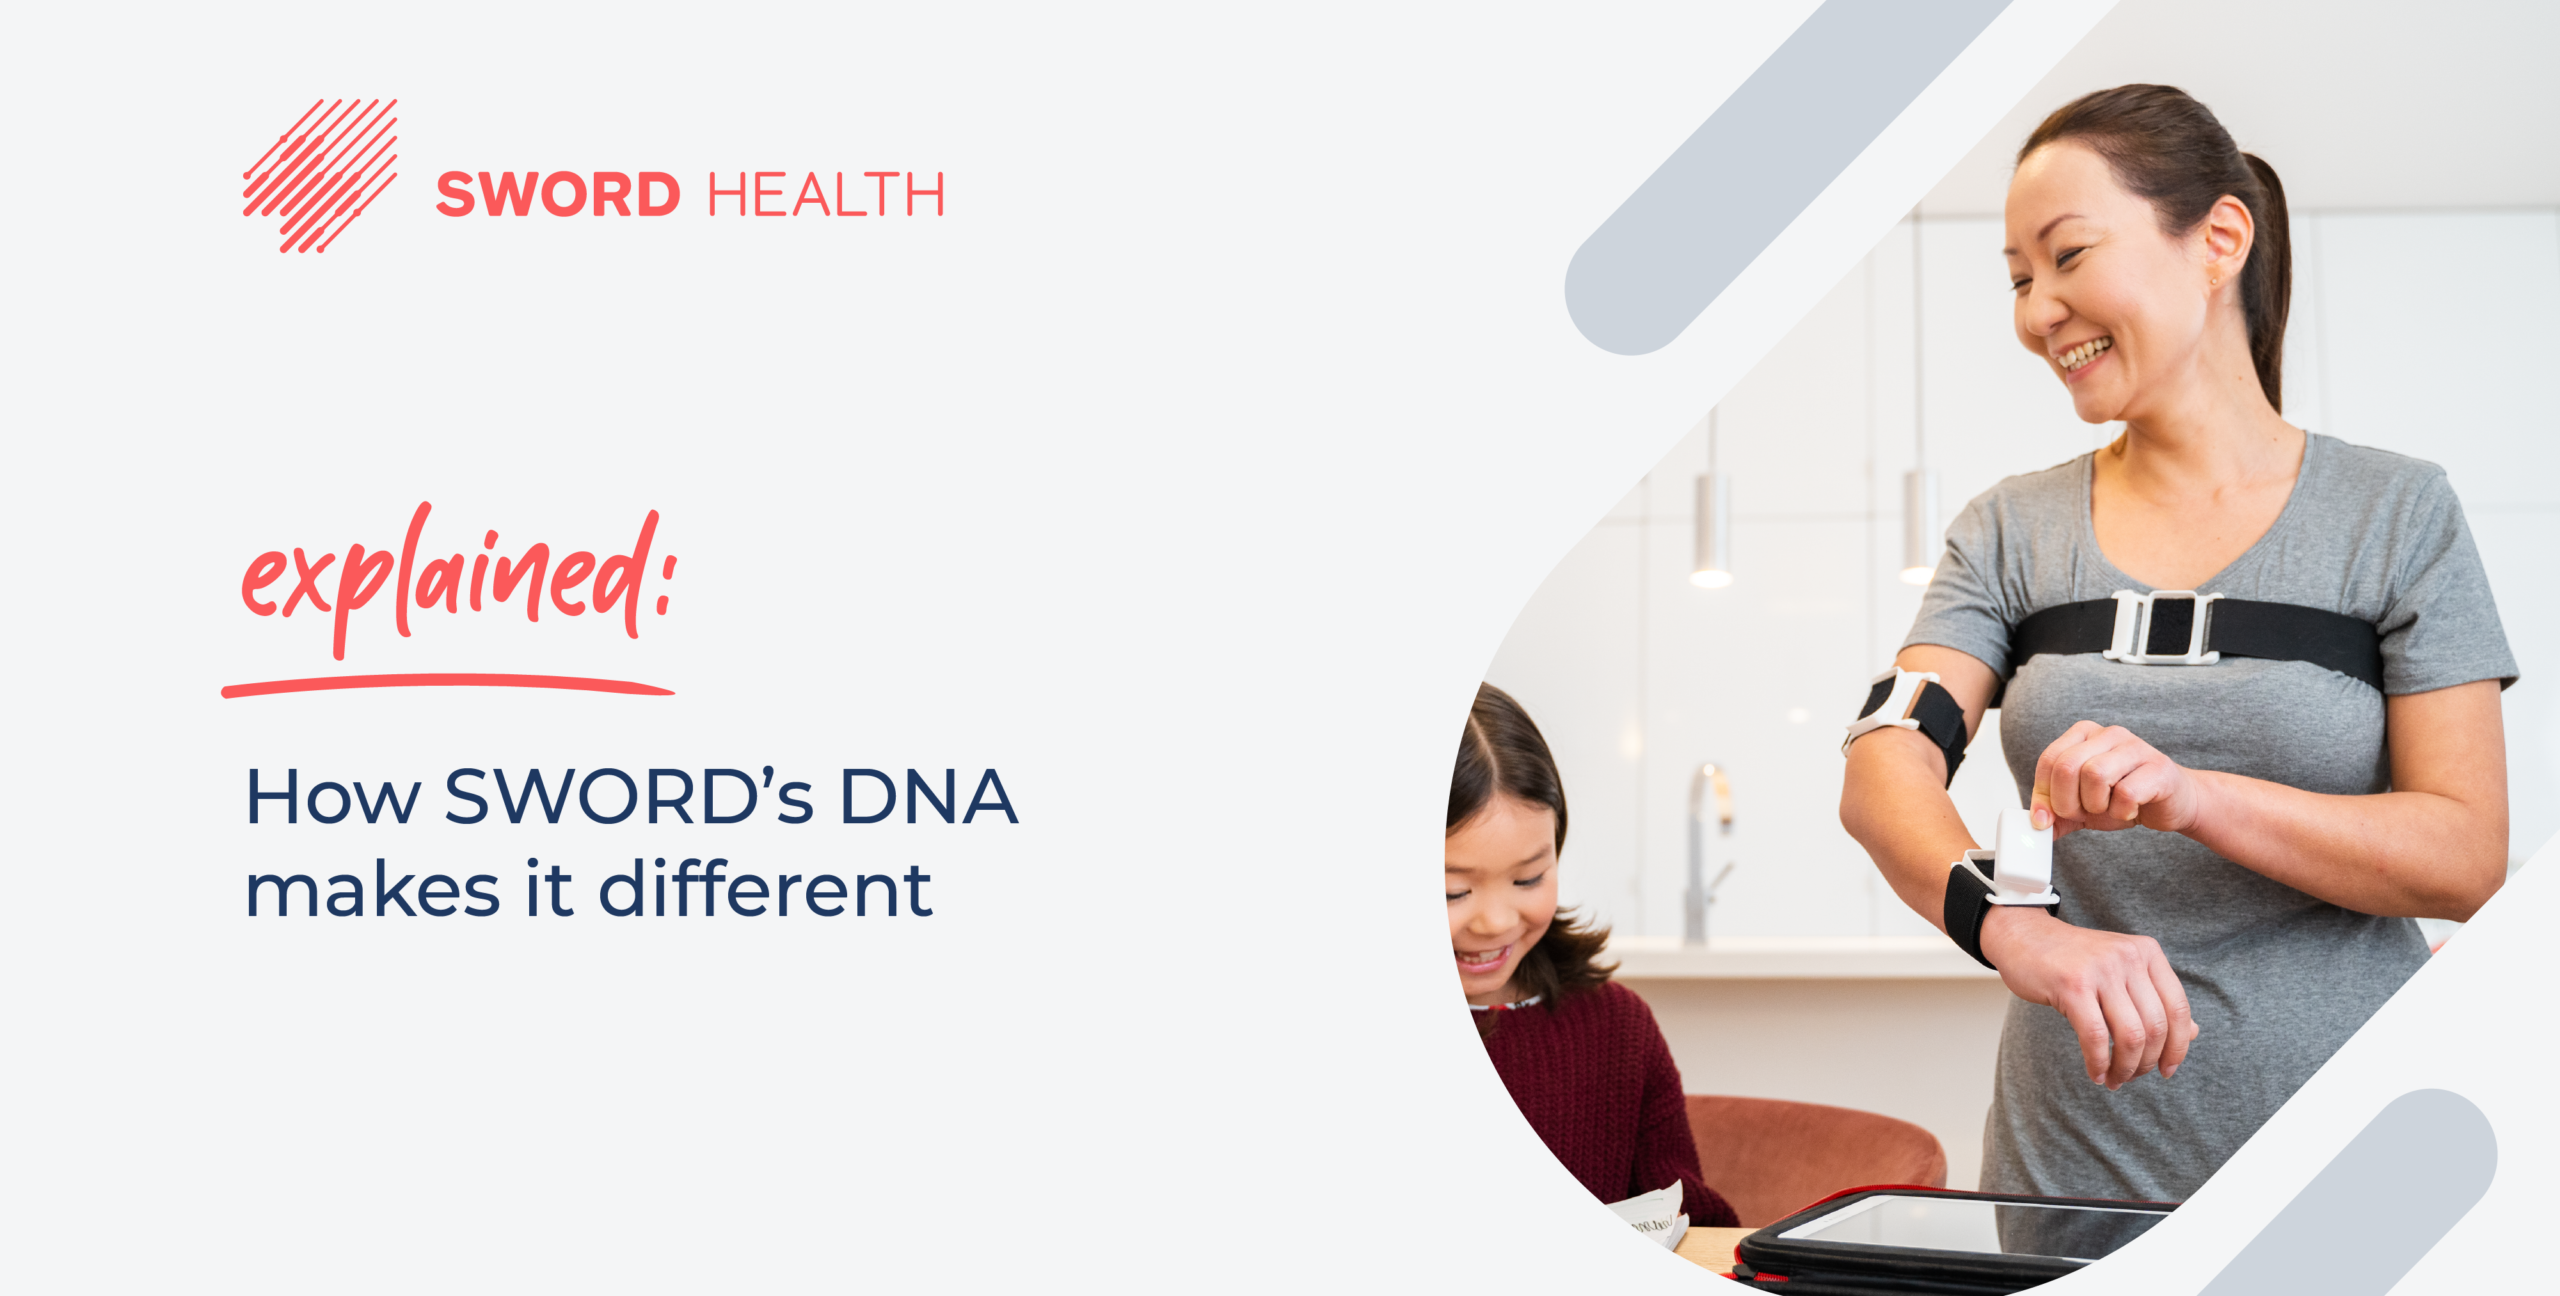 Sword Health's DNA makes us different